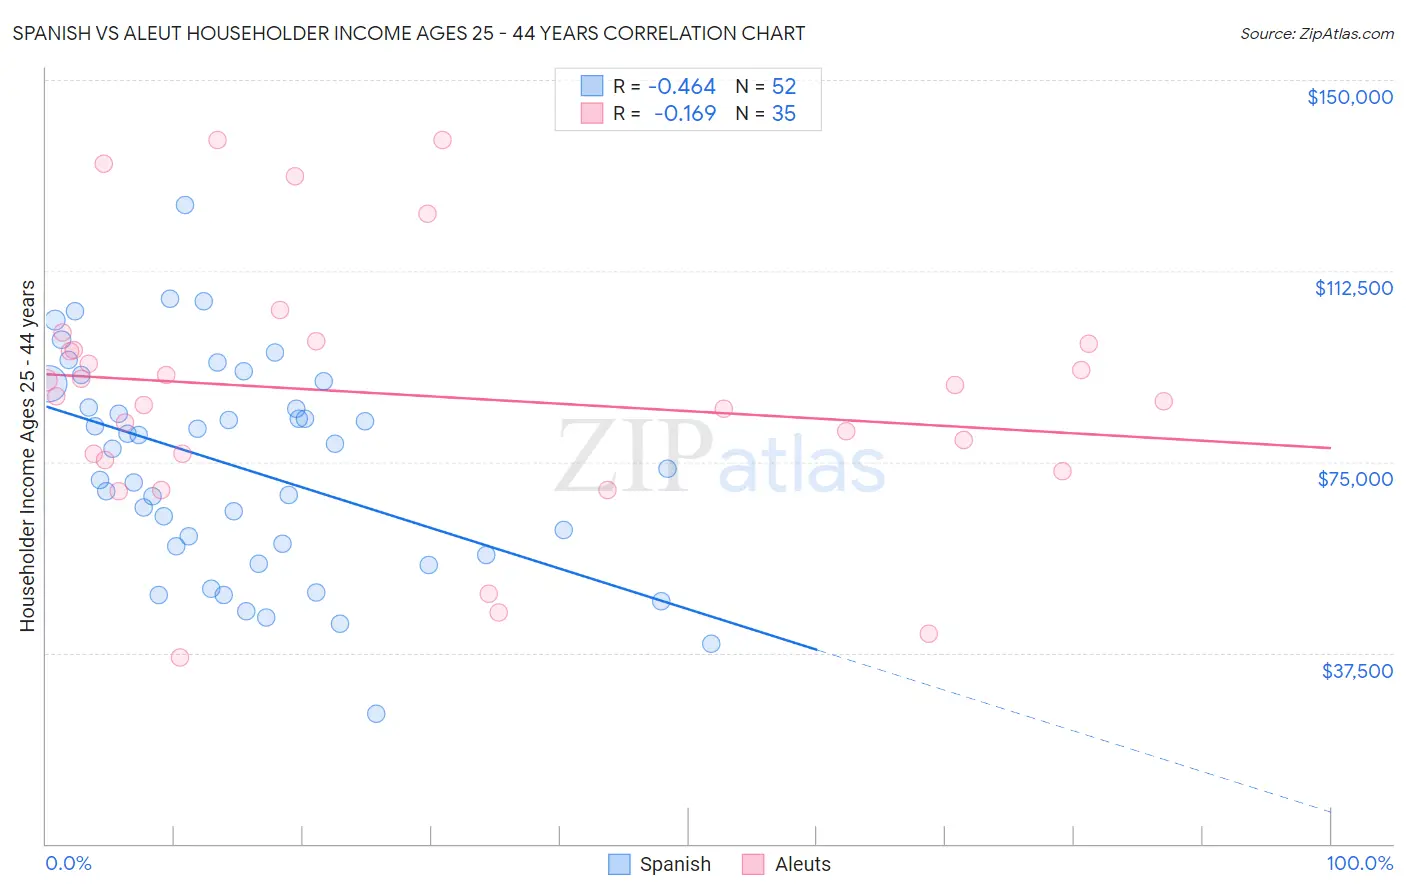 Spanish vs Aleut Householder Income Ages 25 - 44 years